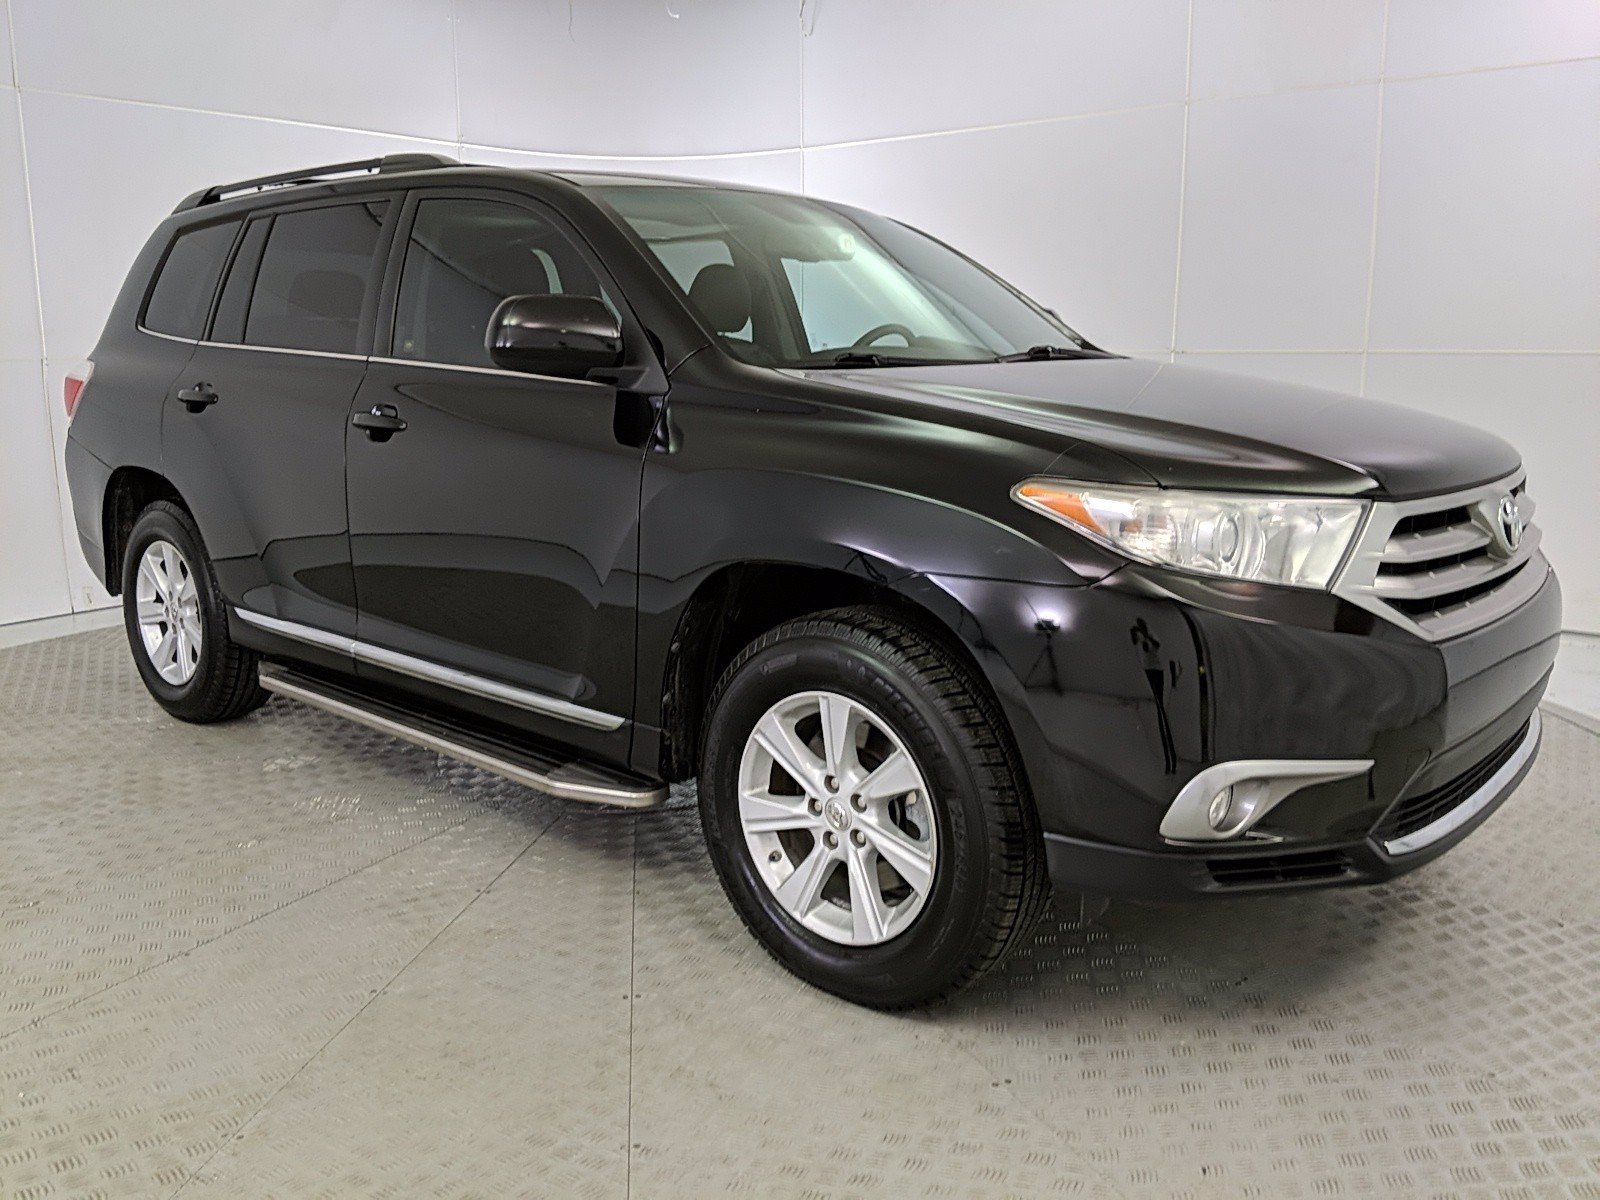 Pre Owned 2013 Toyota Highlander Sport Utility in Irondale U118125 